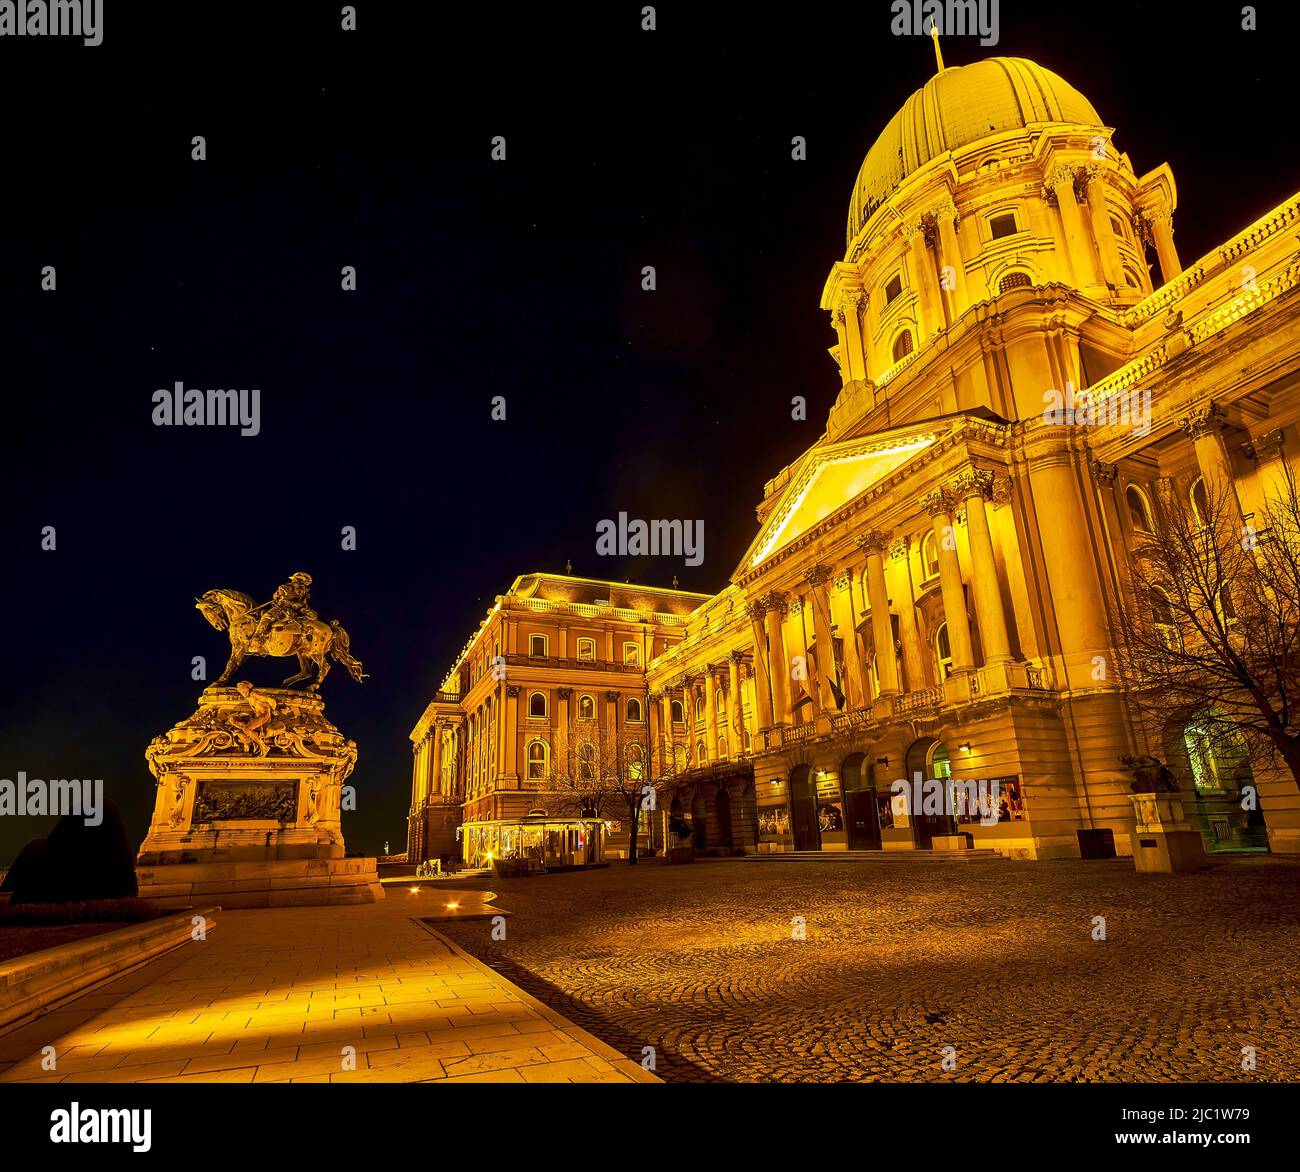 BUDAPEST, HUNGARY - FEBRUARY 23, 2022: The outstanding  Danube terrace at night with great illuminated Buda Castle and Eugene of Savoy monument, on Fe Stock Photo